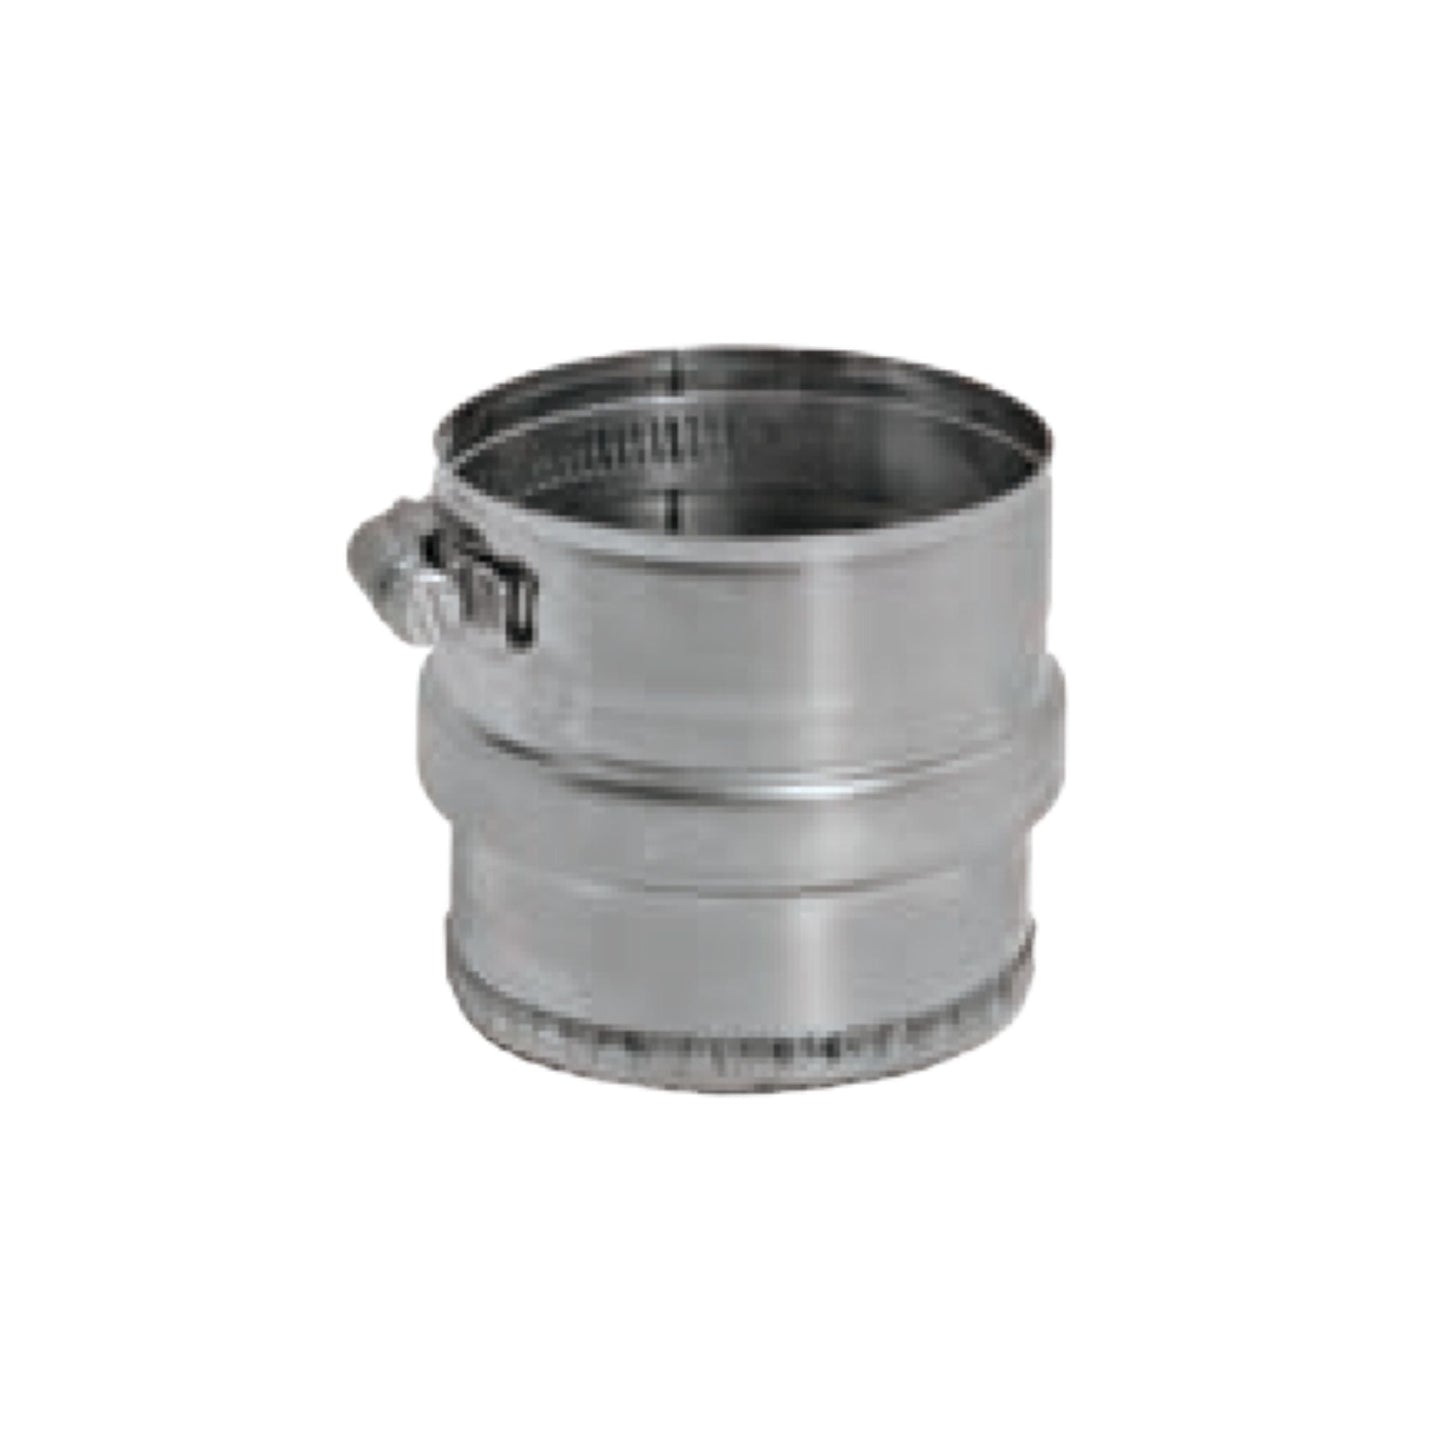 DuraVent FasNSeal 10" 316L Stainless Steel Tee Cap